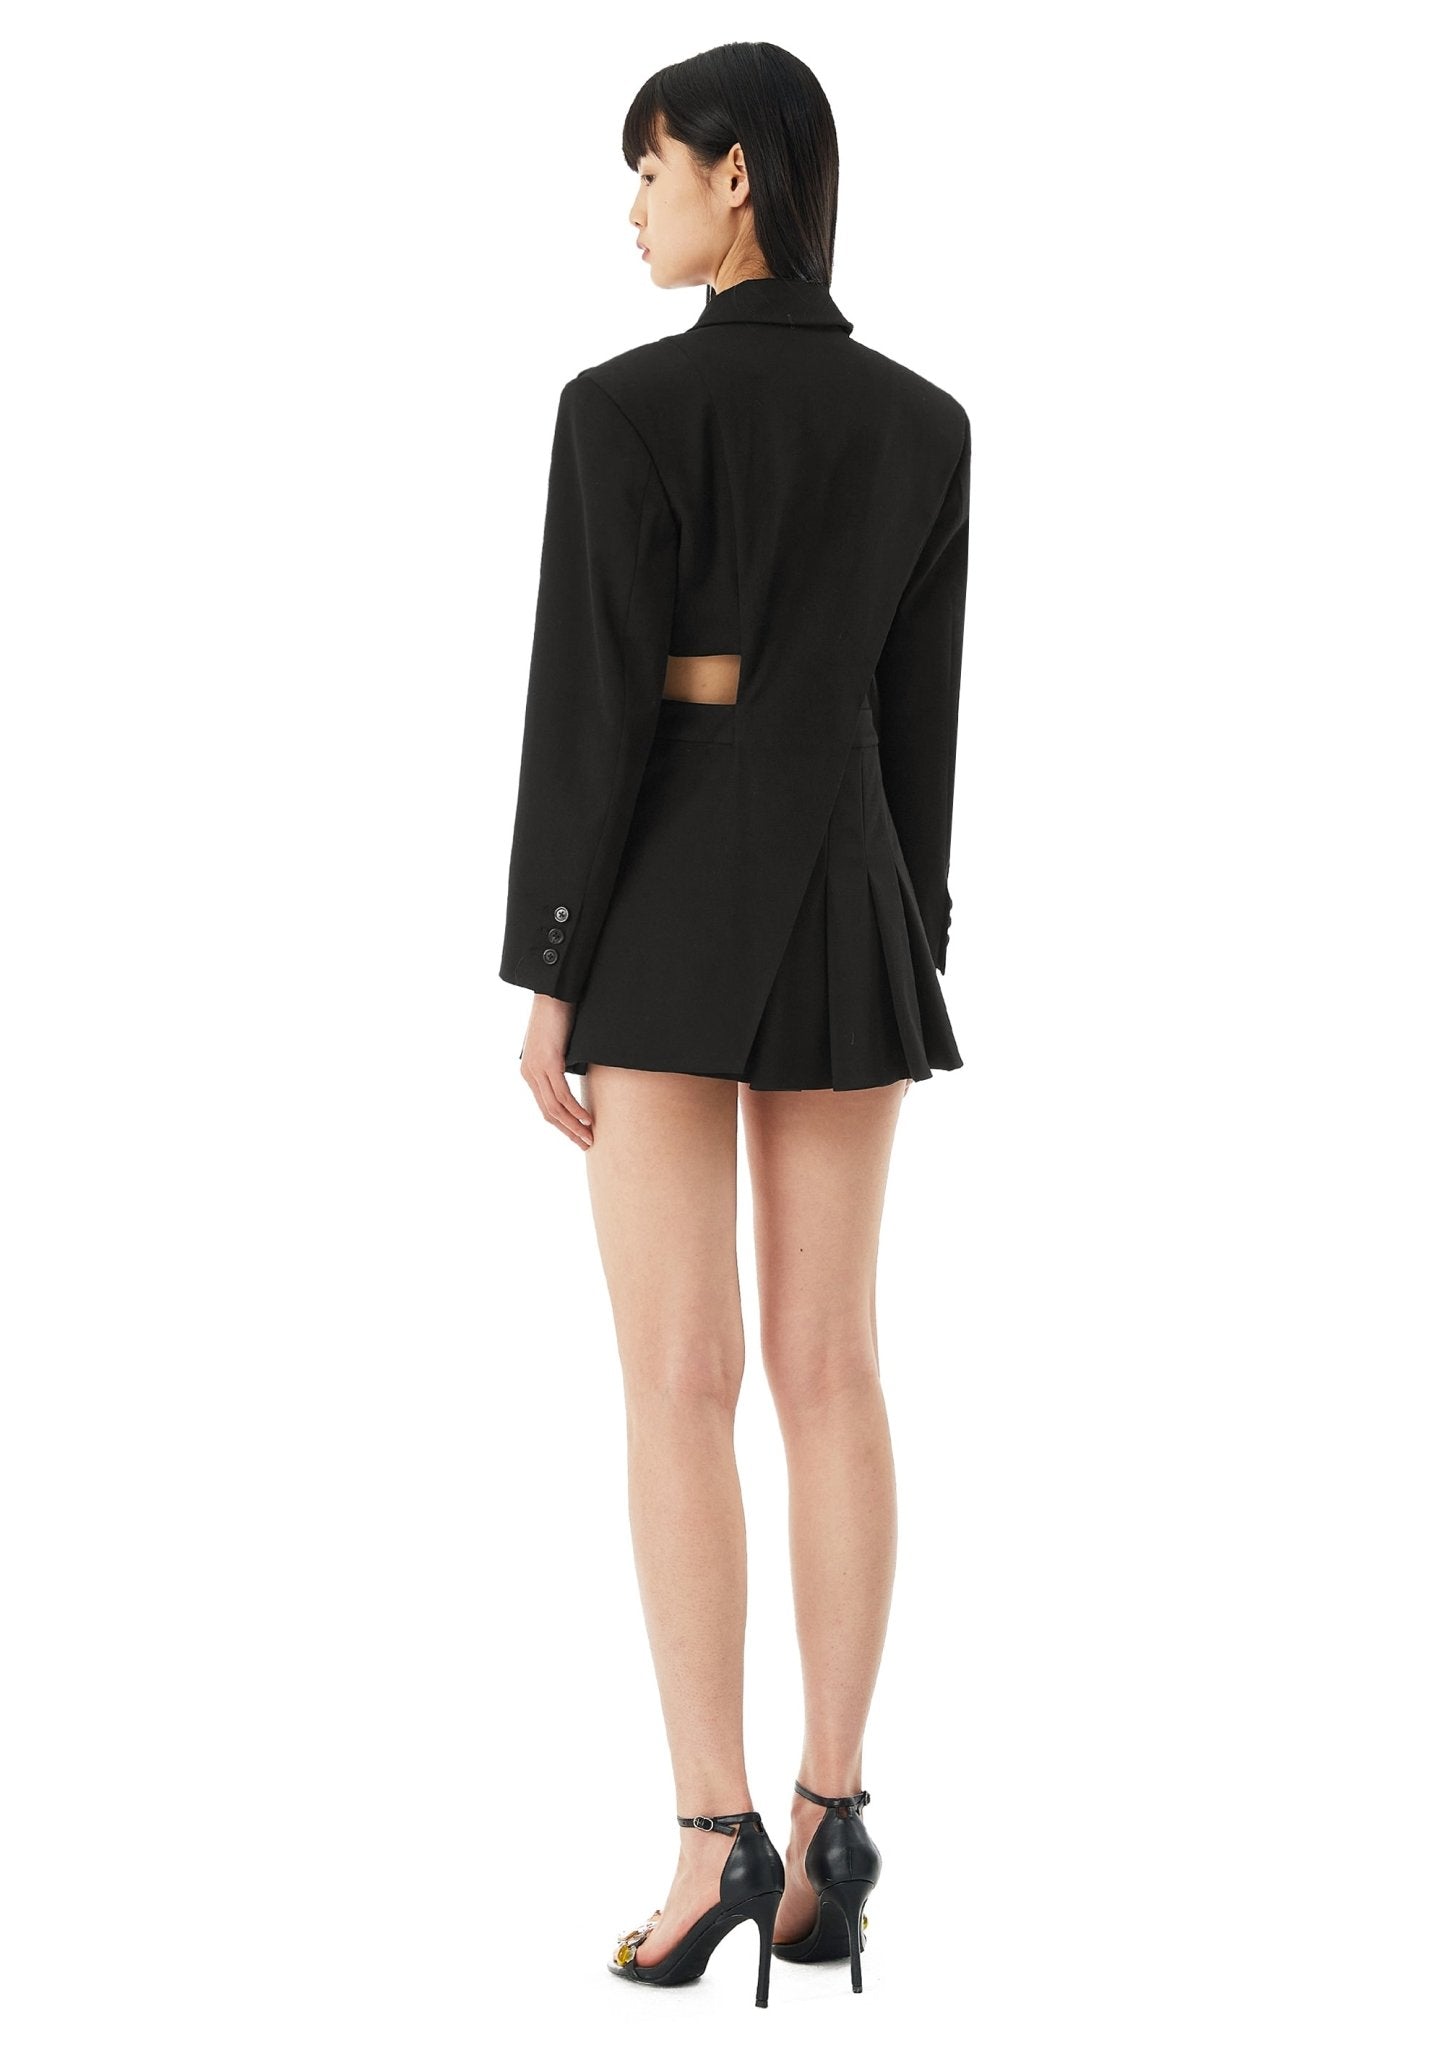 MARRKNULL Black Dislocation Suit Dress | MADA IN CHINA